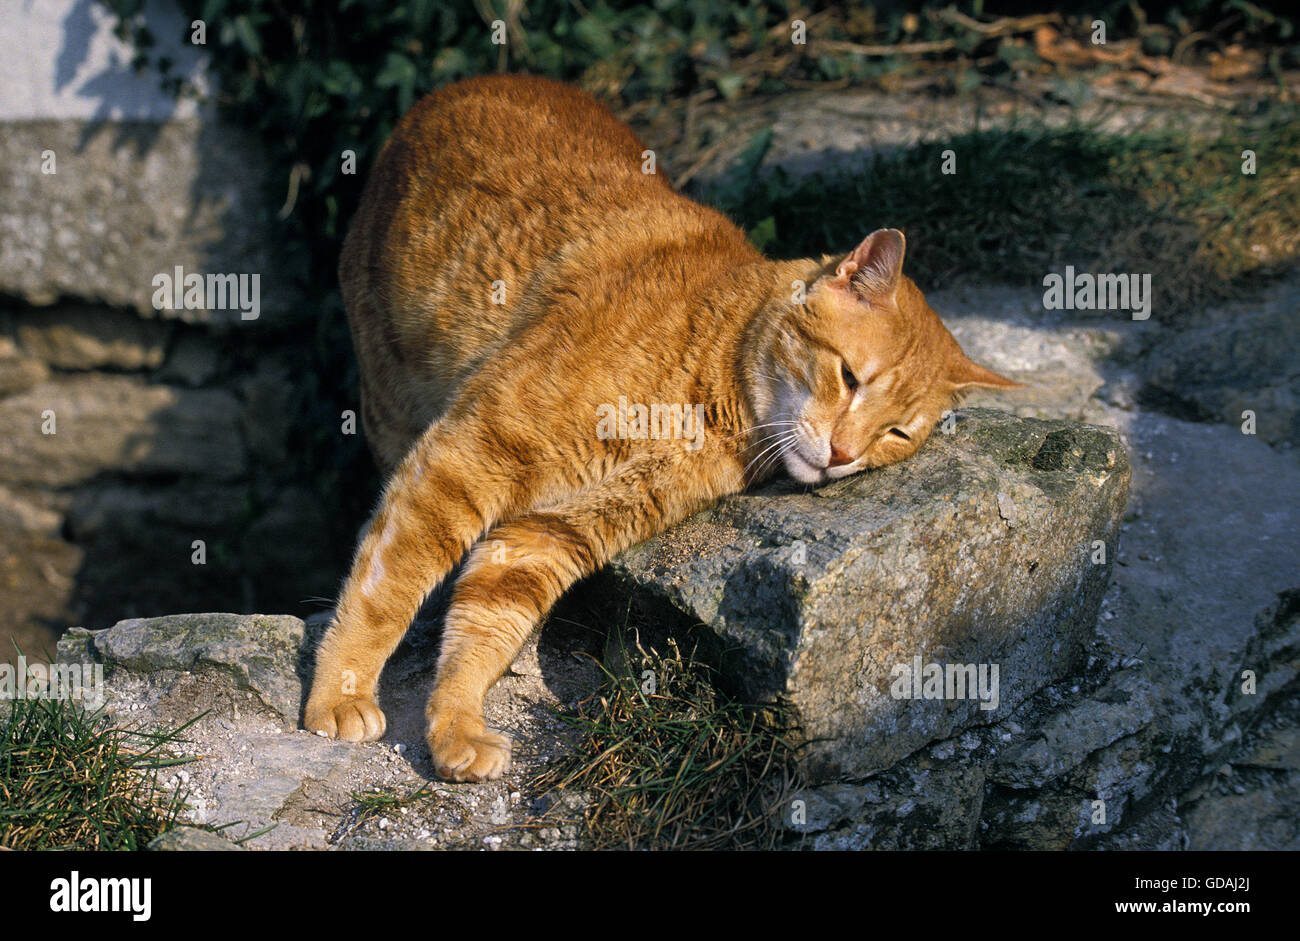 Red Tabby Domestic Cat, Adult rubbing Head on Rock Stock Photo